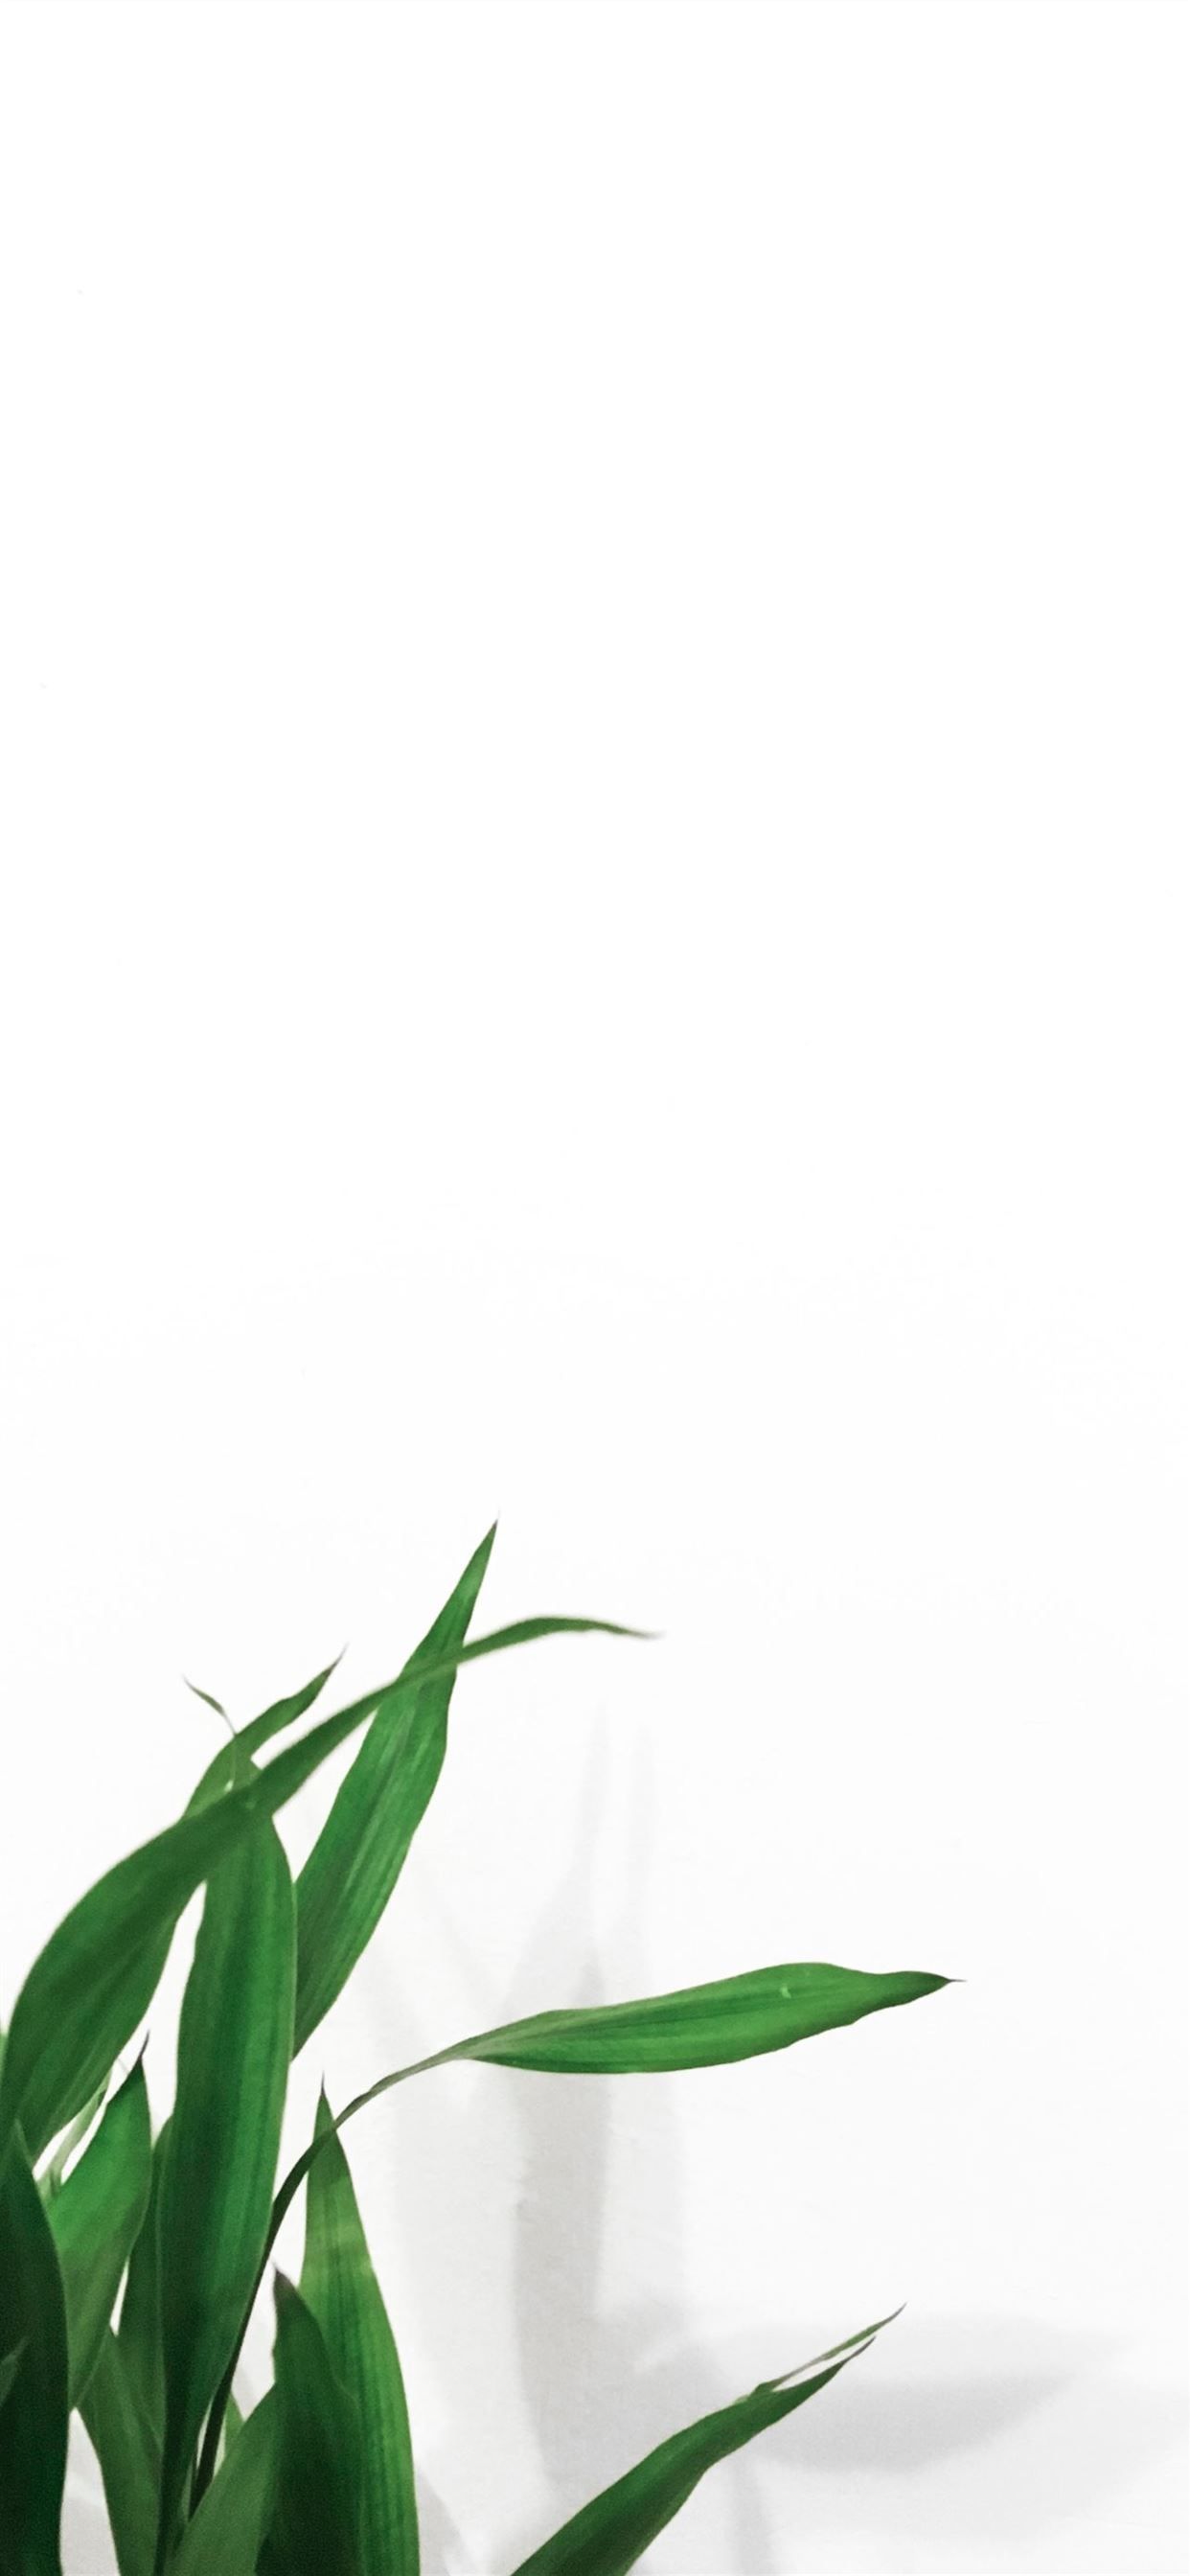 A plant with green leaves in front of a white background - Plants